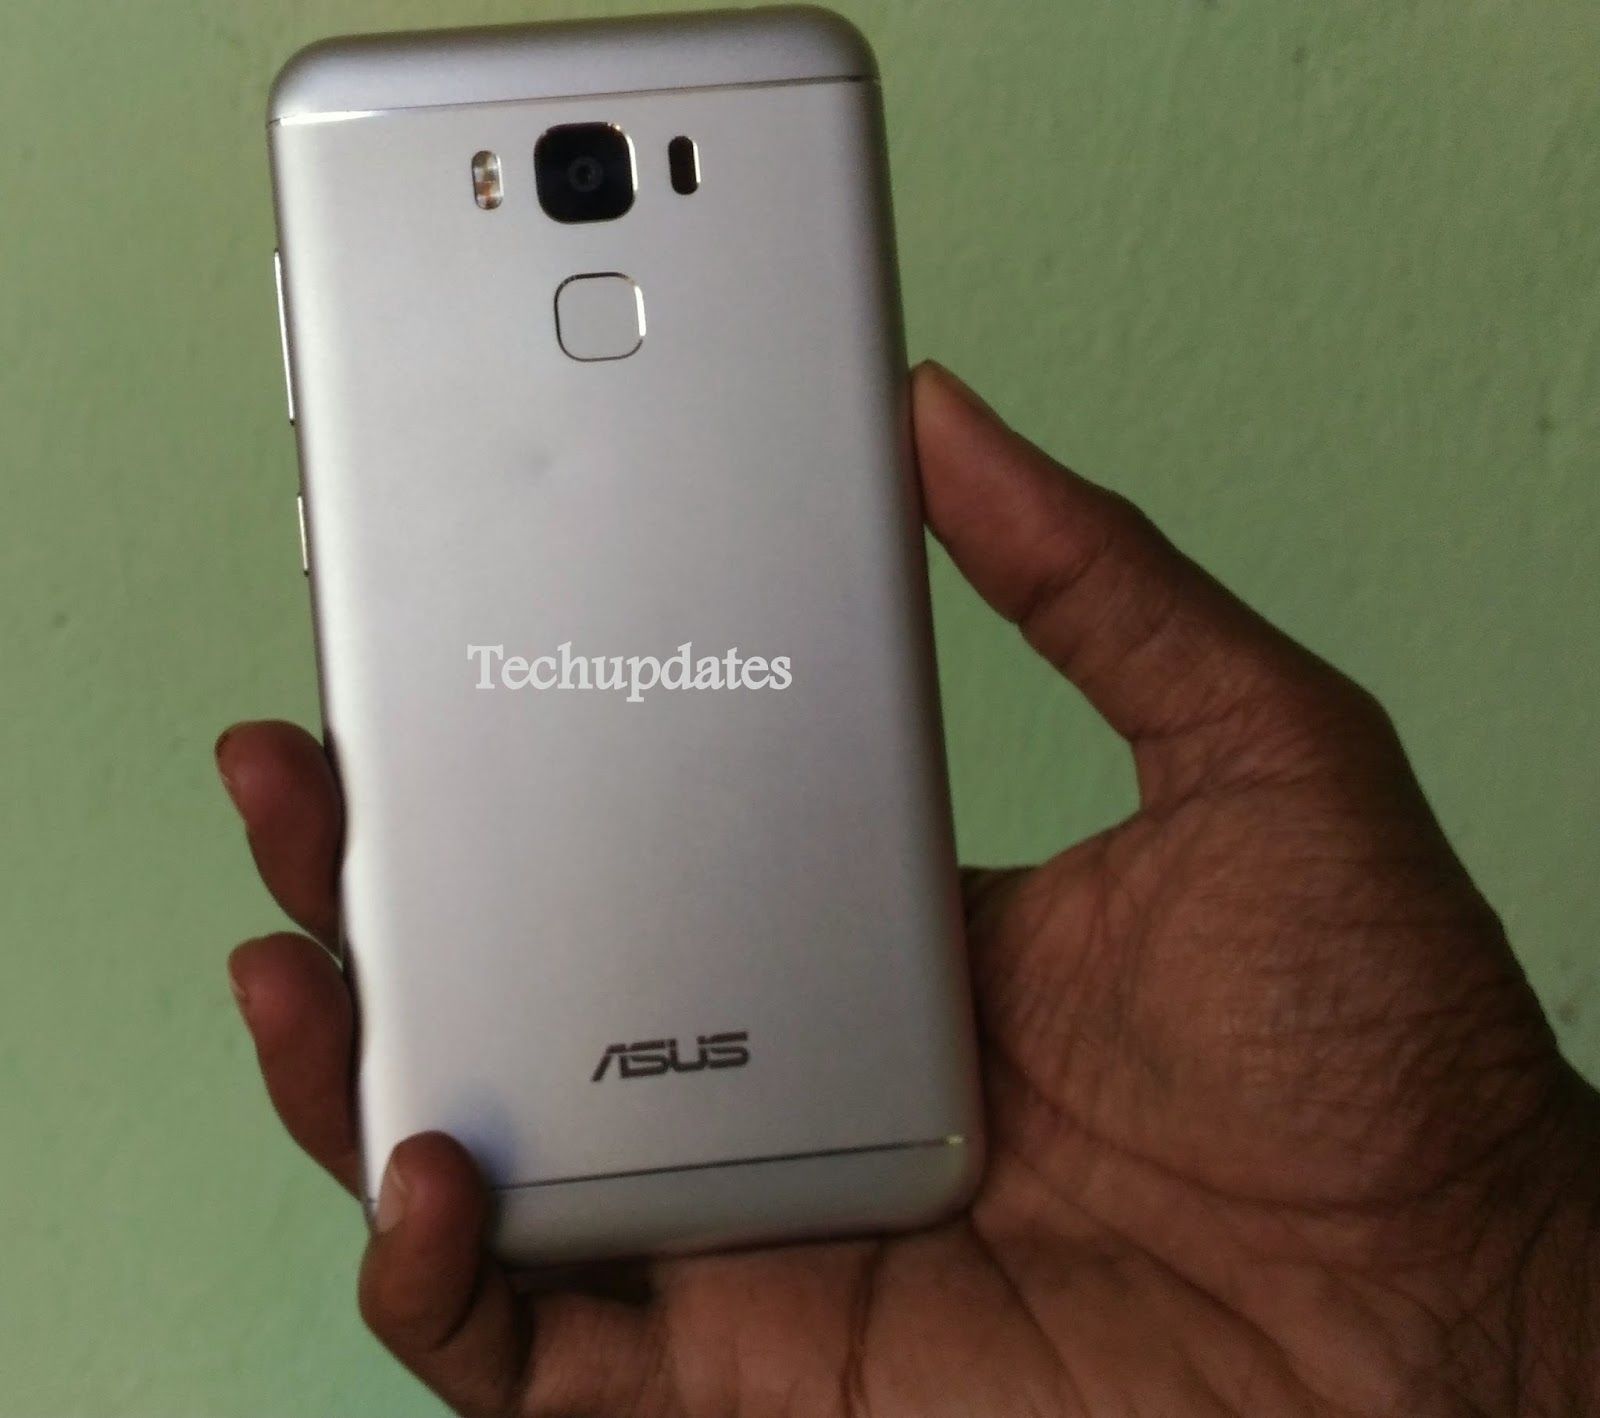 Asus Zenfone 3 Max Zc553kl Gets Android 8 1 Oreo Update Tech Updates